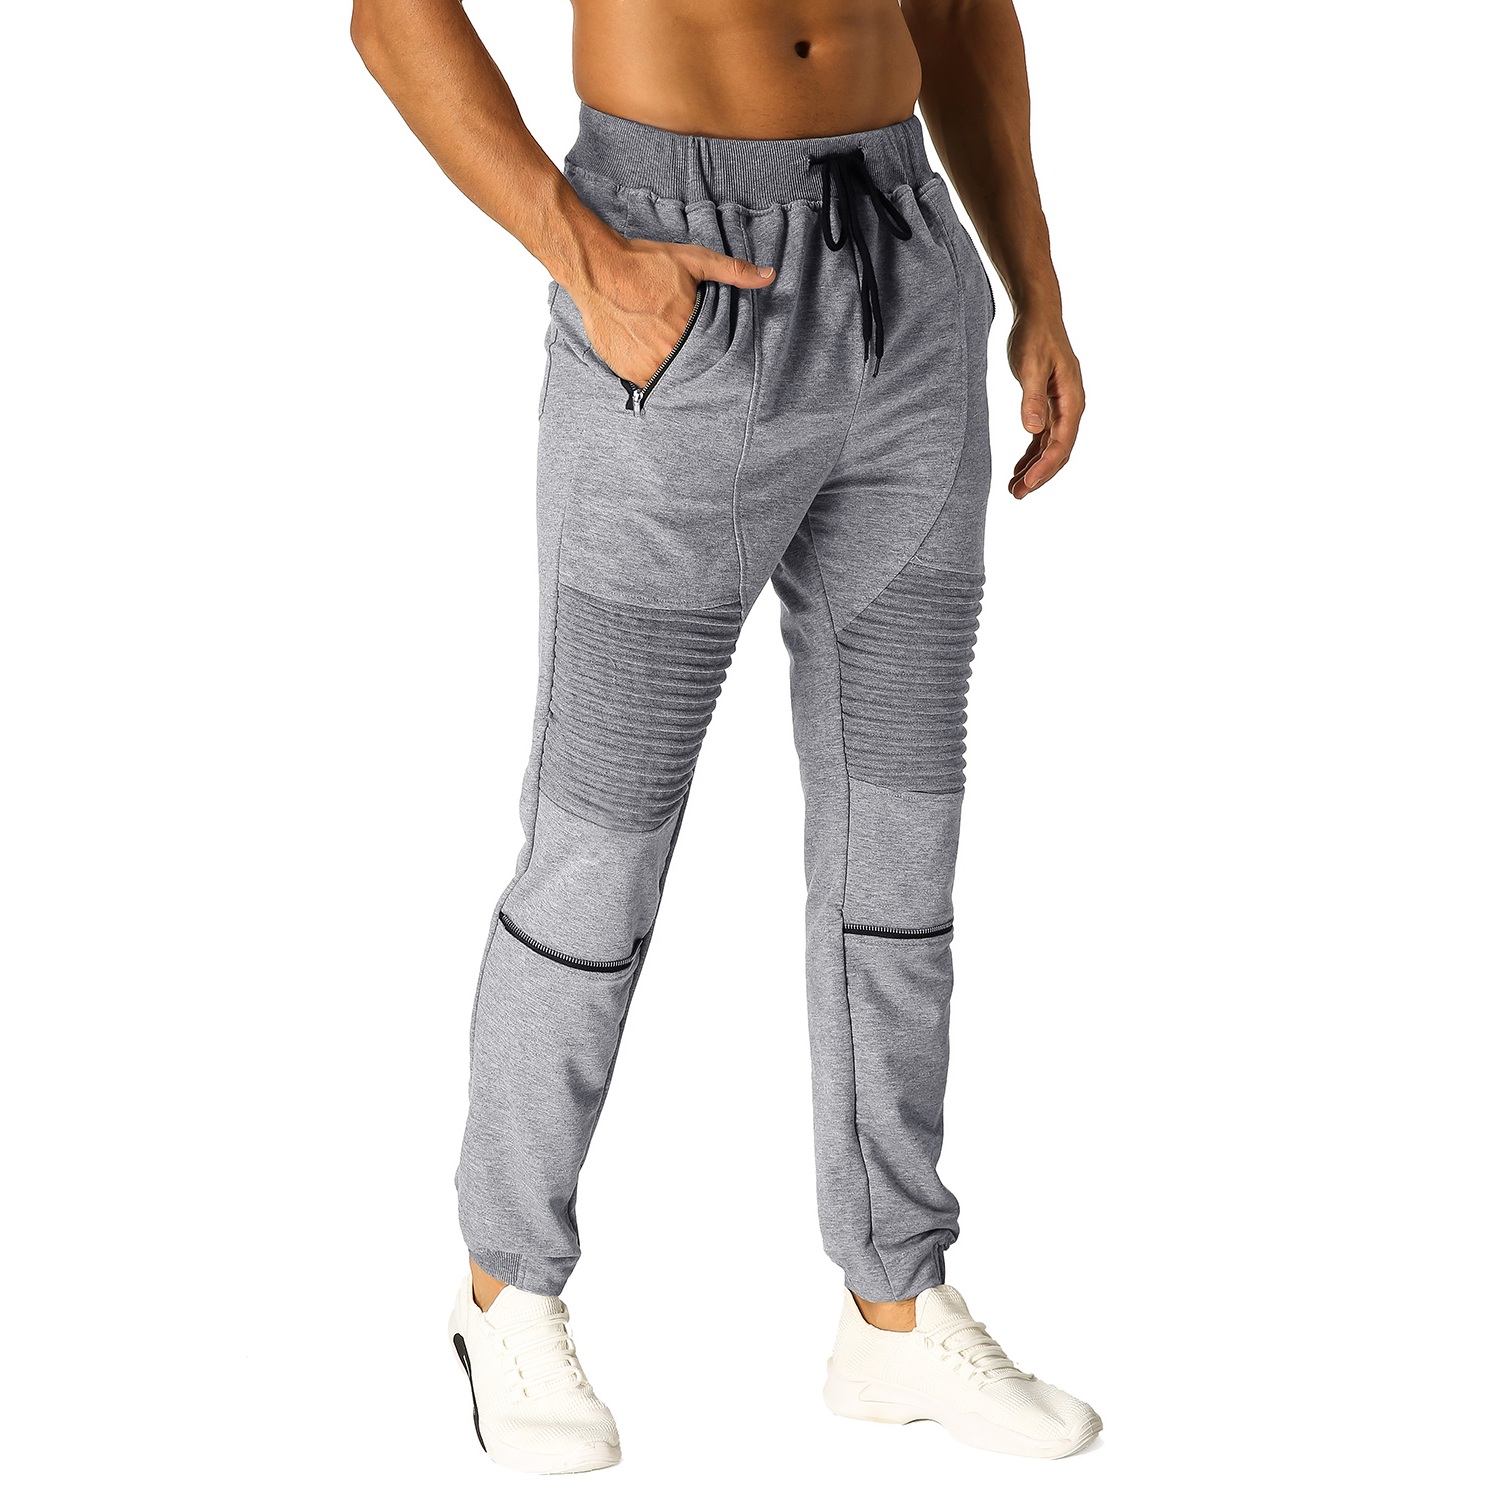 Mens-Yoga-Fitness-Sports-Pants-Wearable-Breathable-Keep-Warm-Outdoor-Sports-Pants-1550391-5